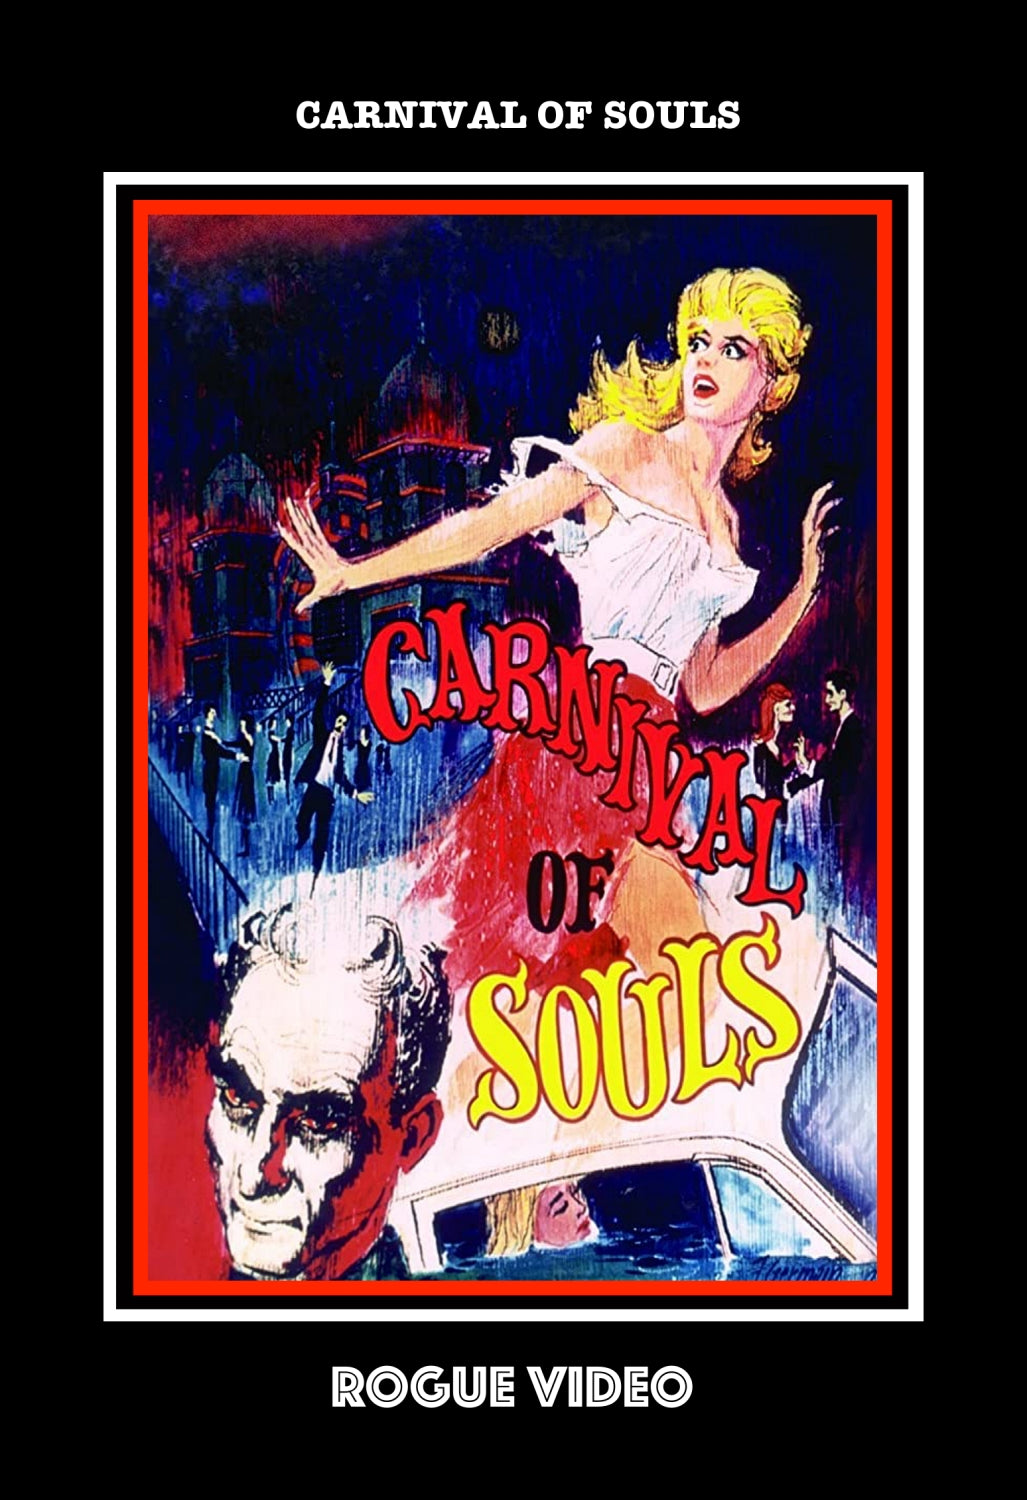 ROGUE VIDEO - rare horror DVDs - cult films & fiction "CARNIVAL OF SOULS"  (1962)